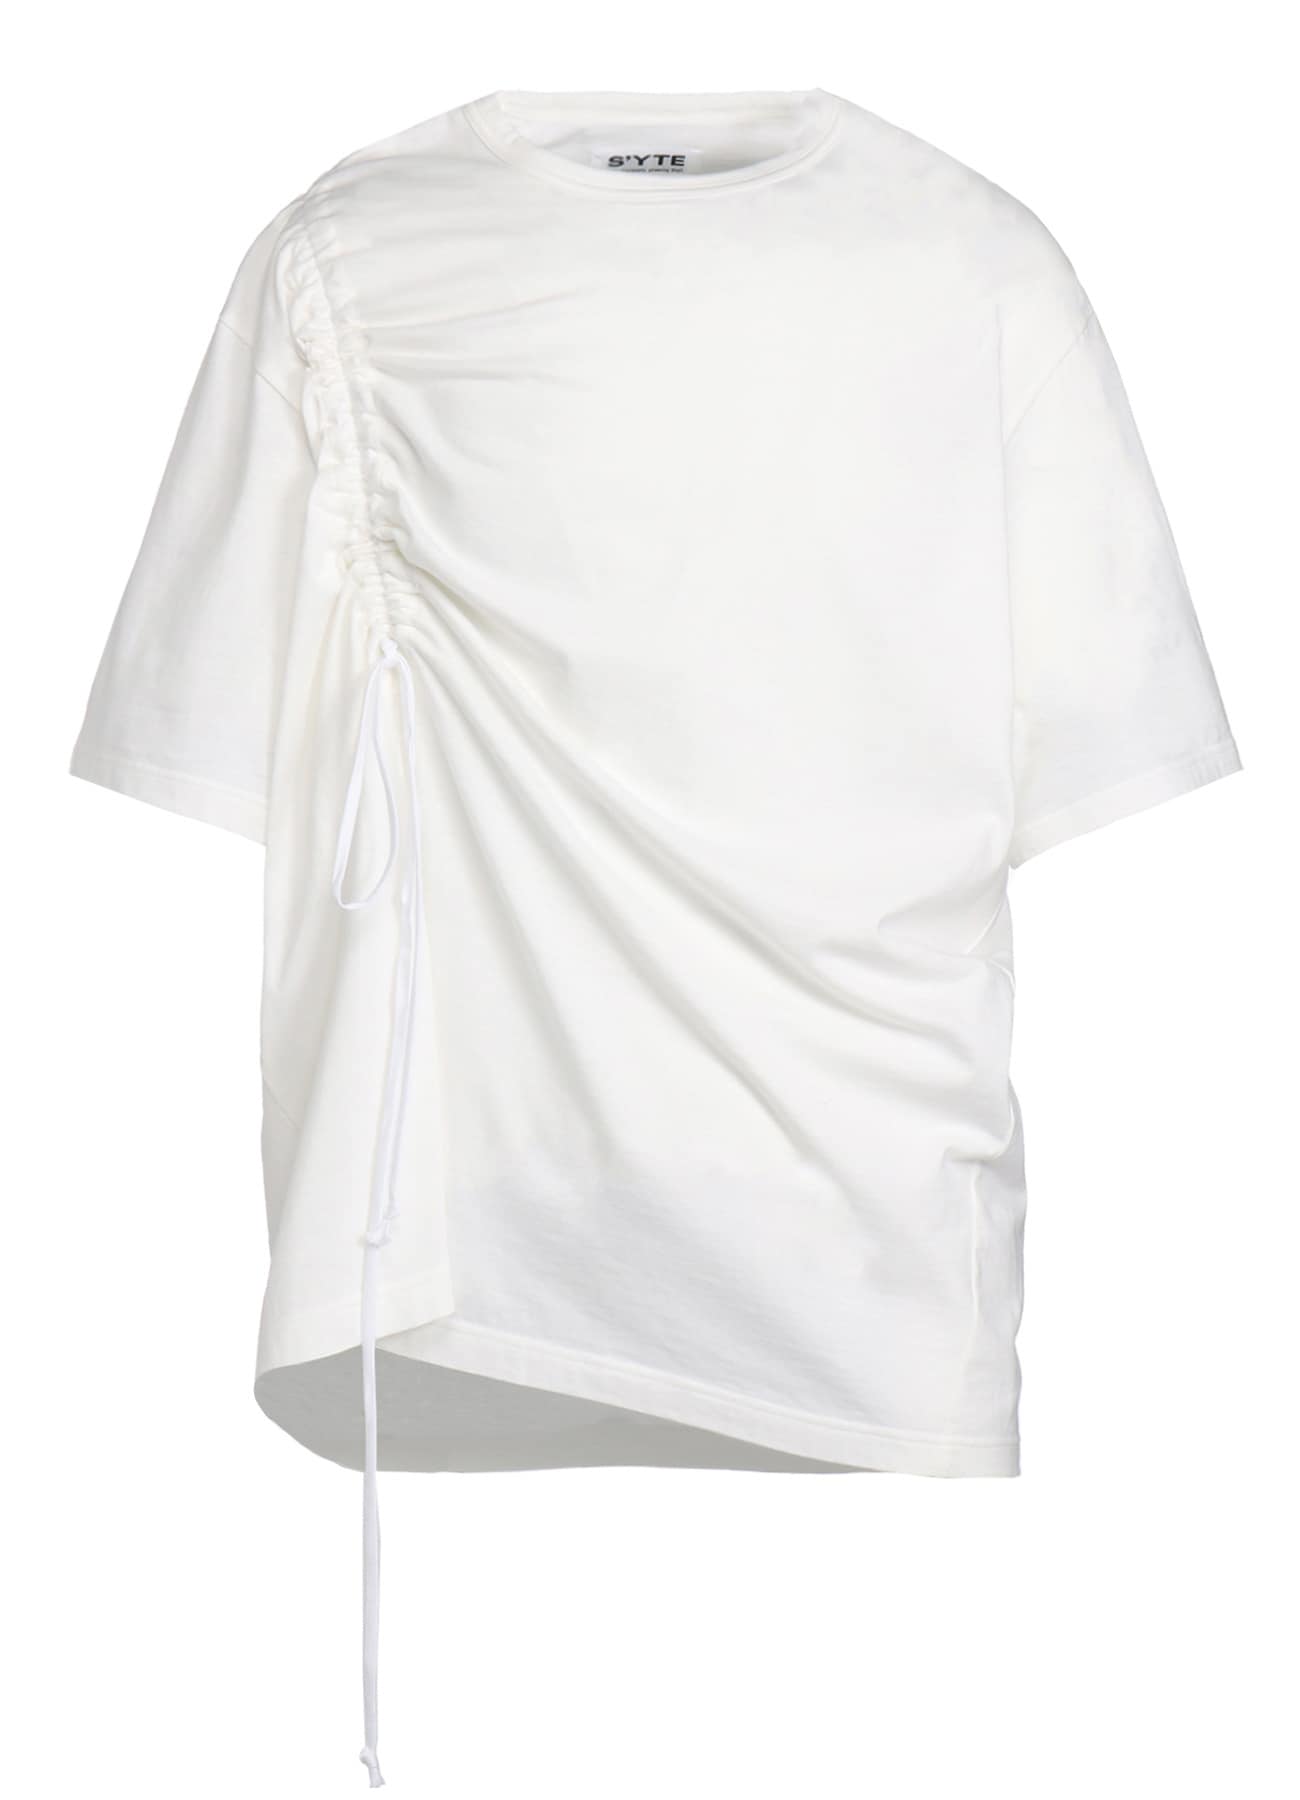 COTTON JERSEY T-SHIRT WITH GATHERED STRINGS(M White): S'YTE｜THE 